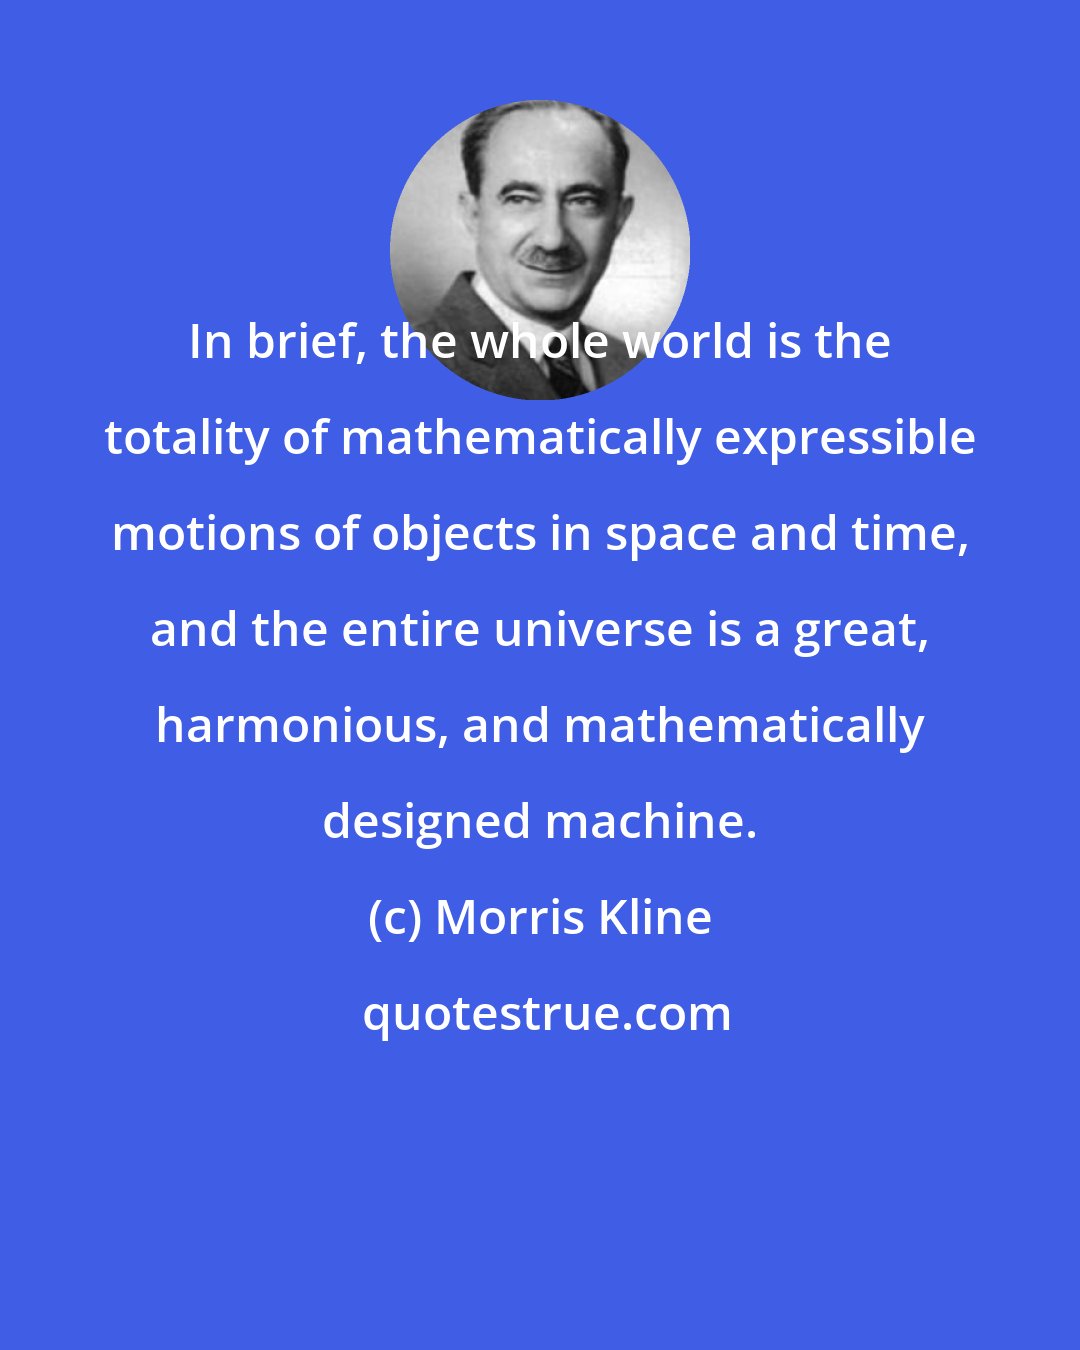 Morris Kline: In brief, the whole world is the totality of mathematically expressible motions of objects in space and time, and the entire universe is a great, harmonious, and mathematically designed machine.